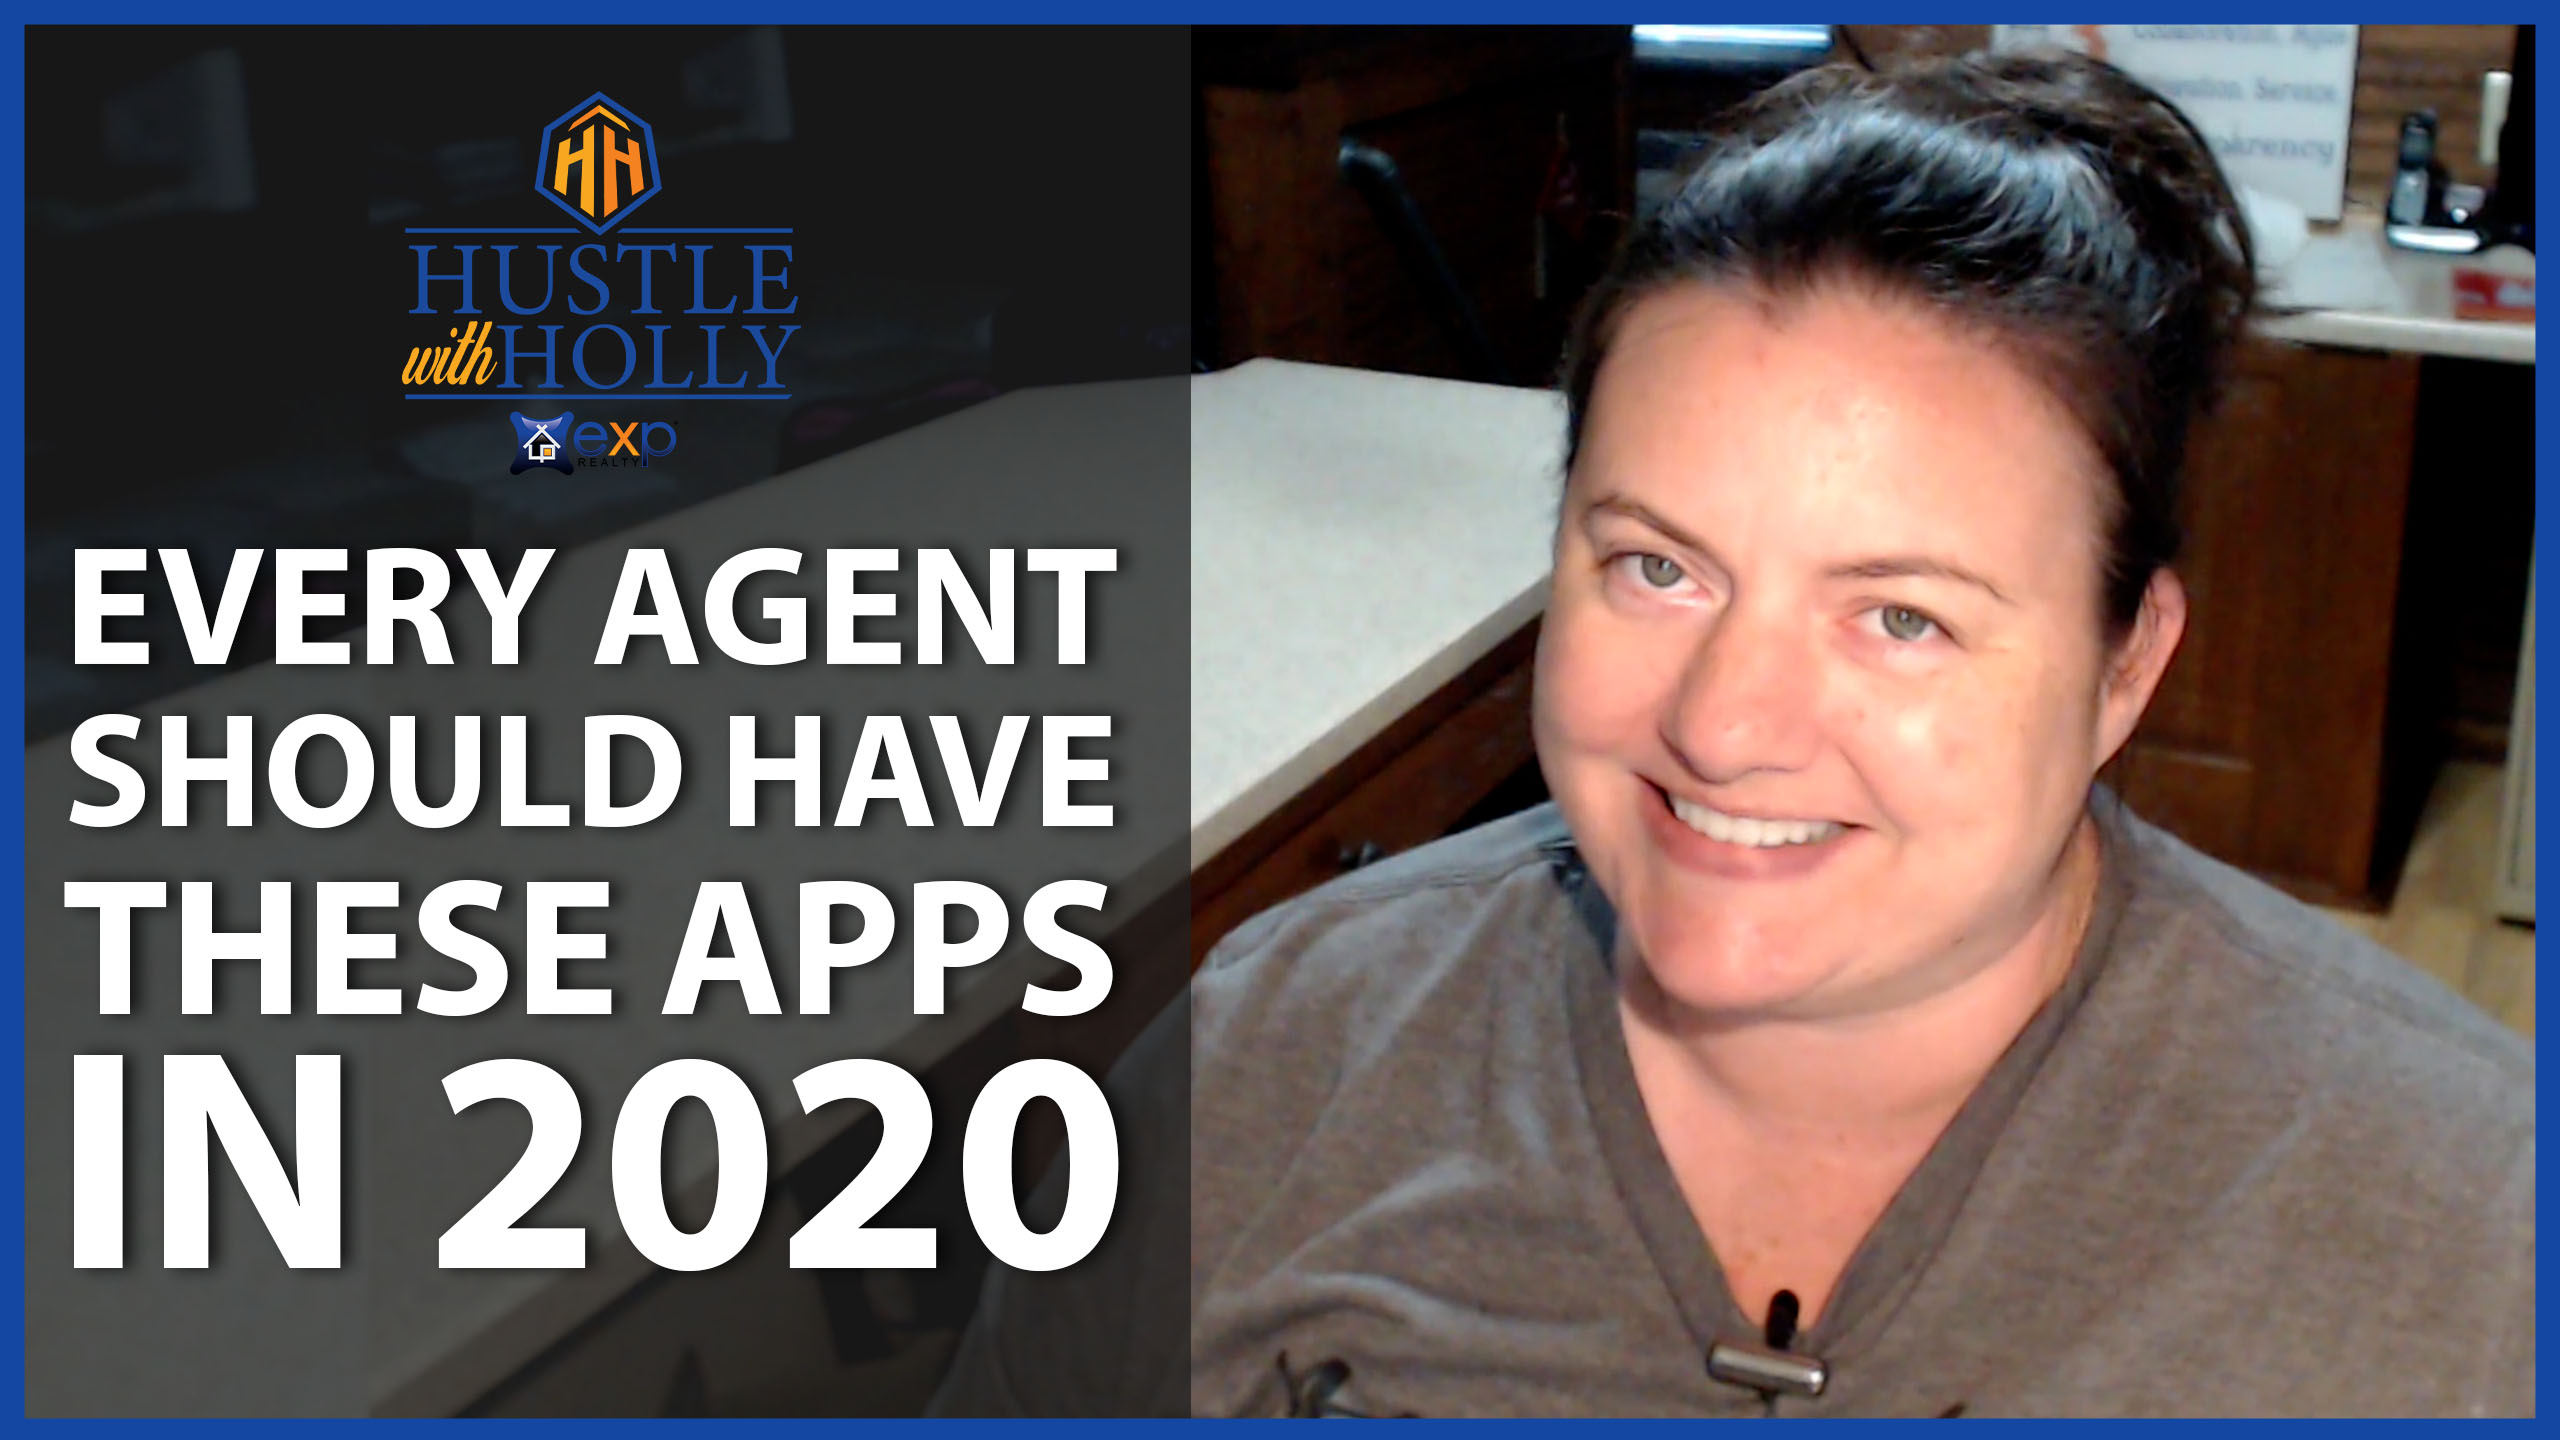 Q: Which Apps Should Every Agent Have in 2020?